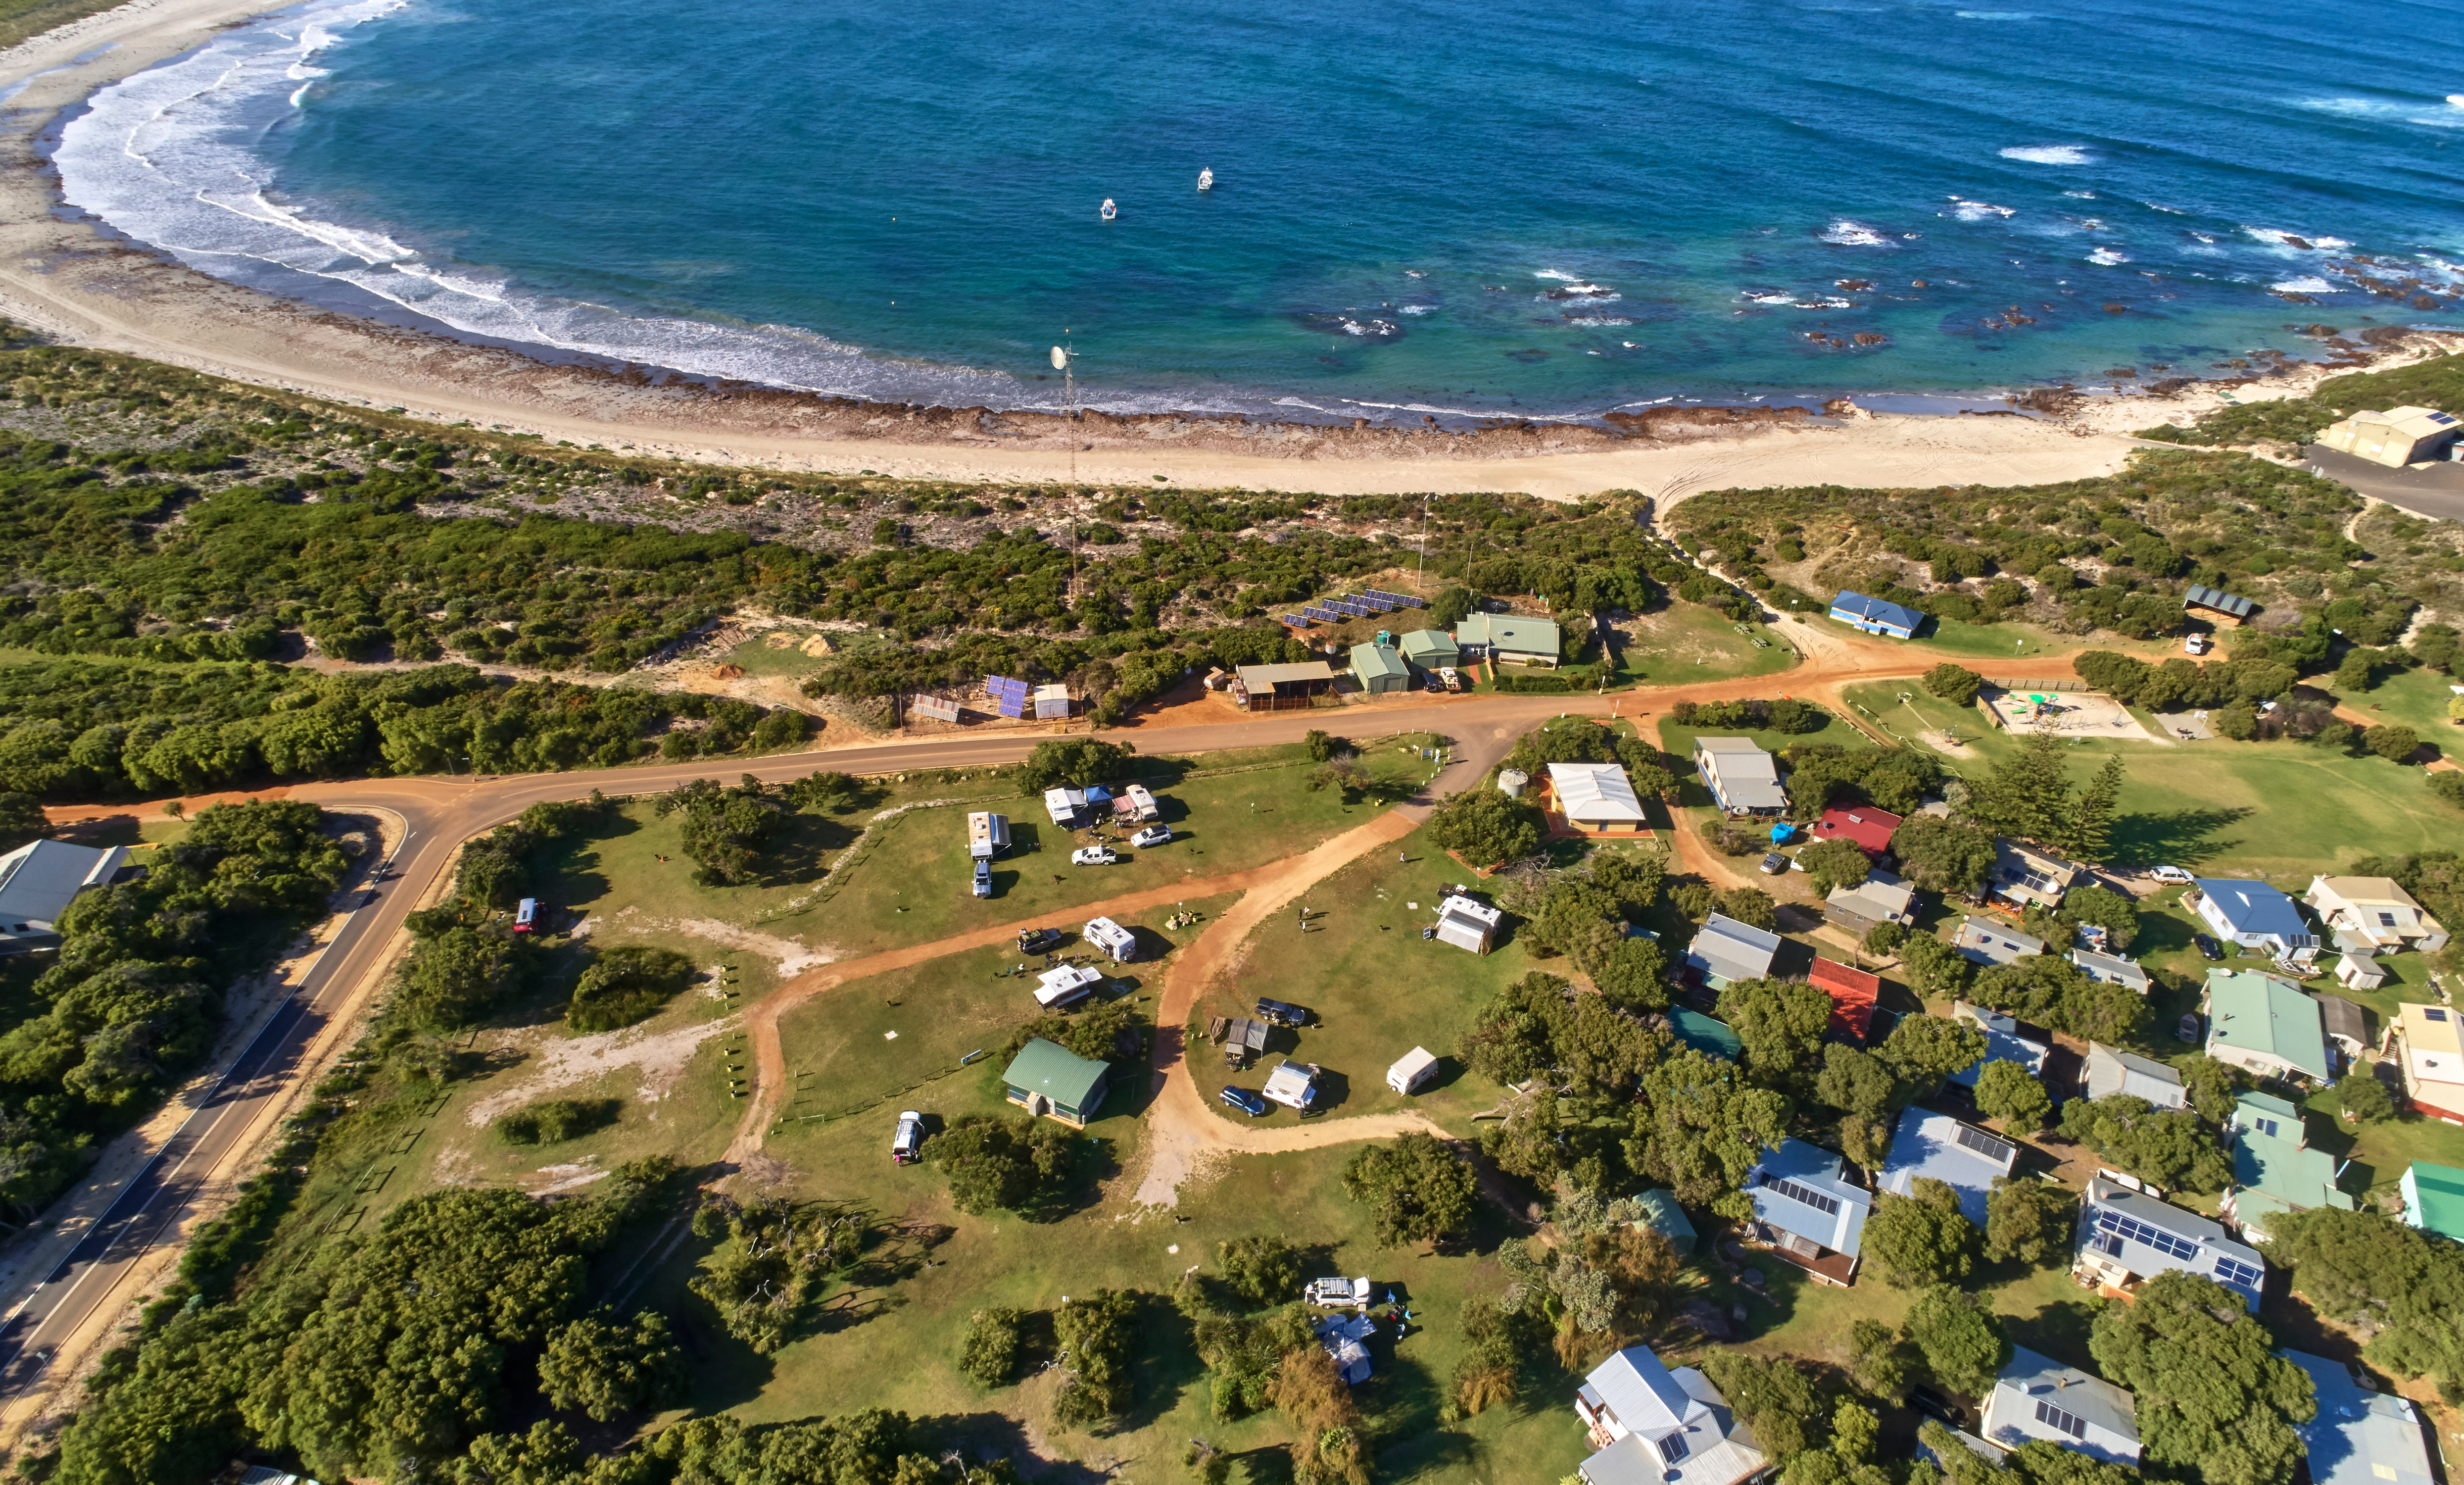 Drone picture of caravans in campground with beach and ocean in the backdrop.